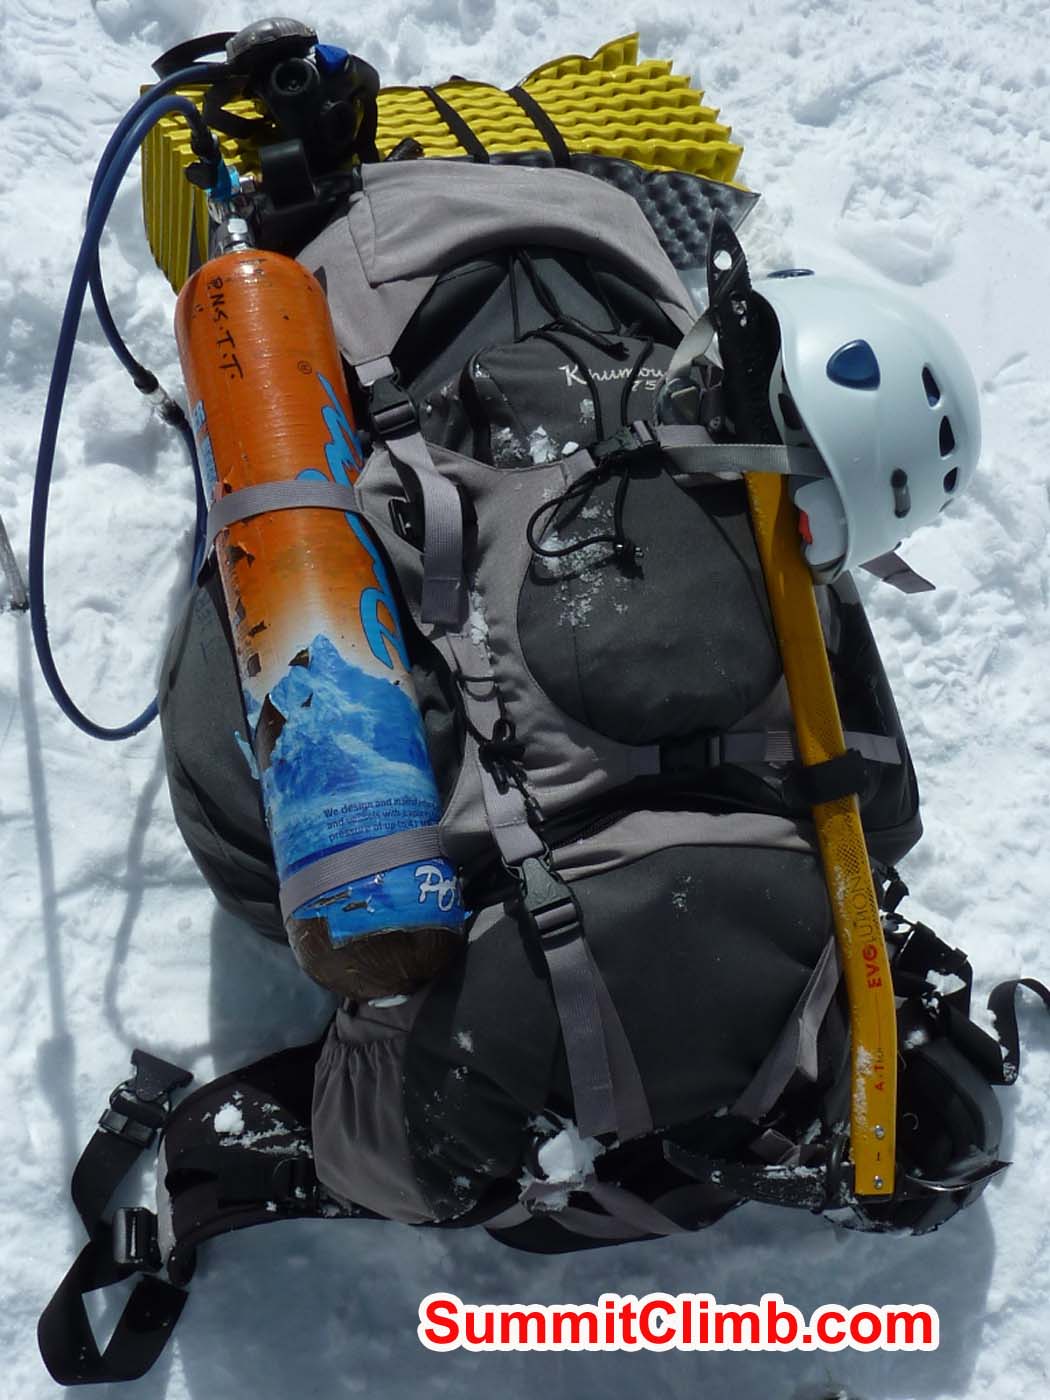 Summit rucksack. Photo by Pascal Tiercelin